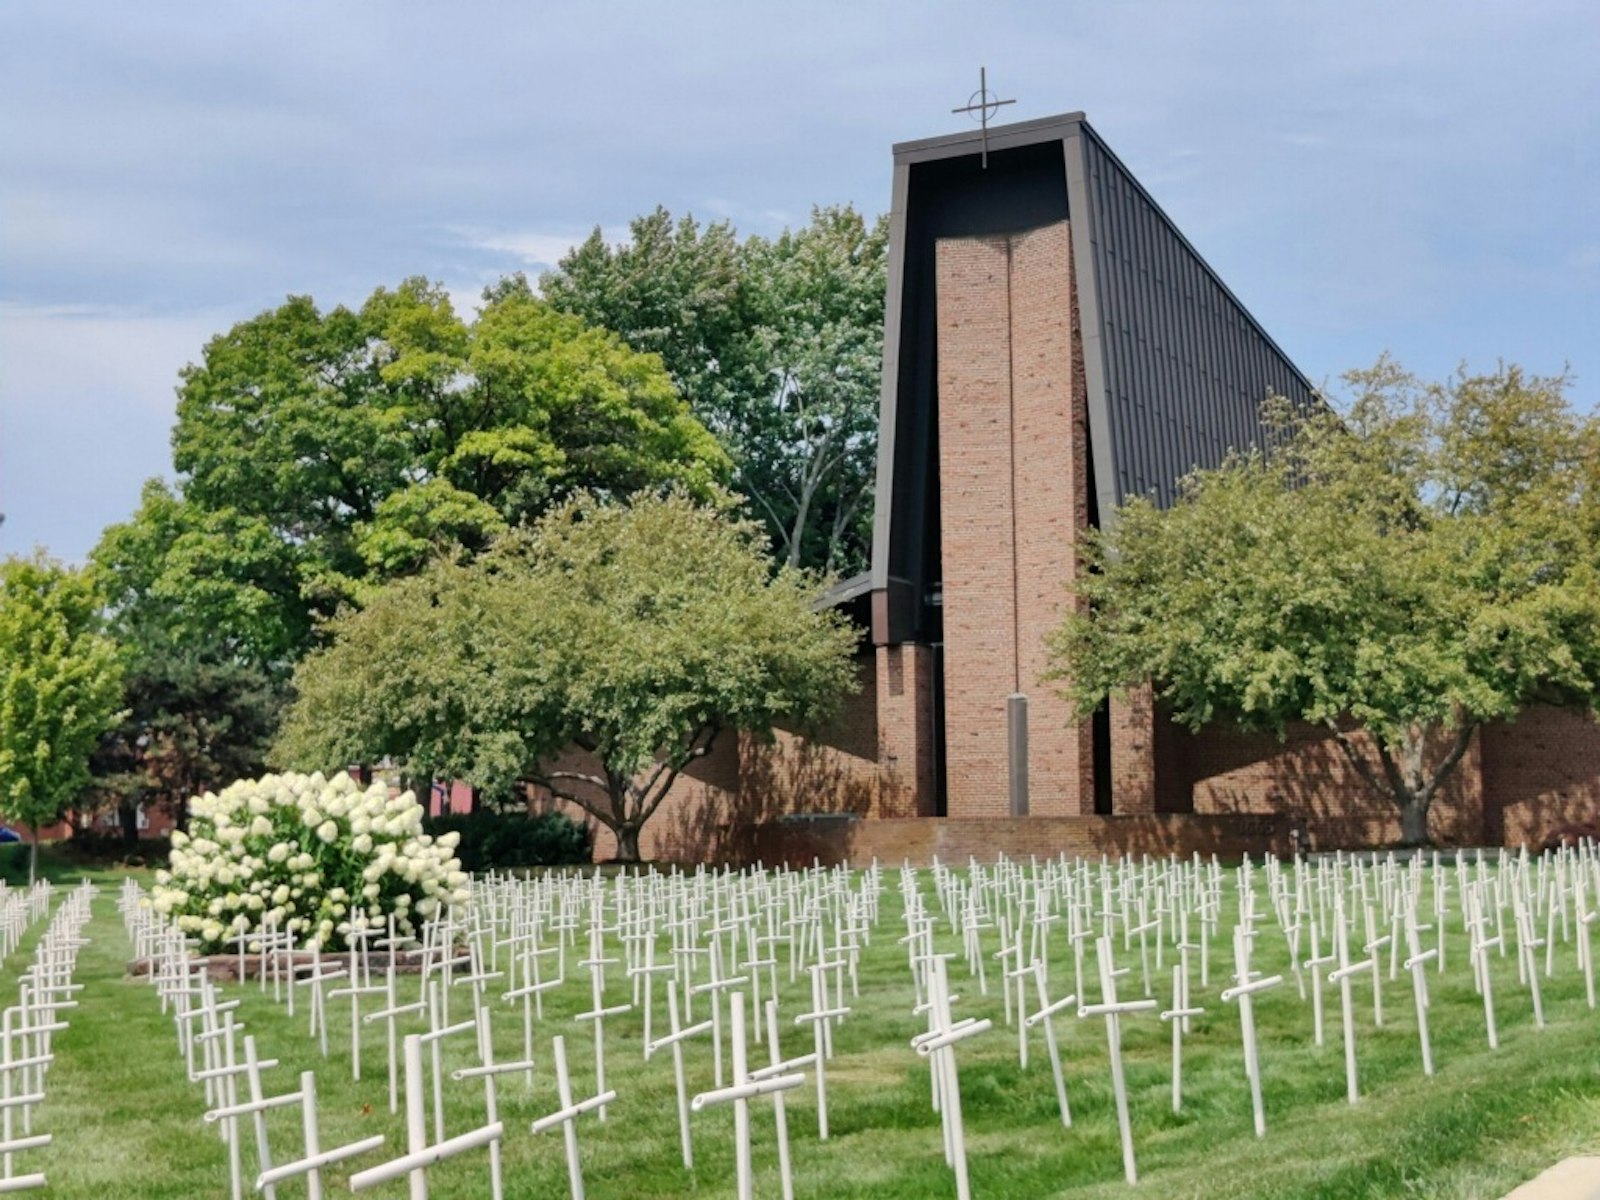 Hundreds of crosses representing victims of abortion are pictured outside St. John Fisher Chapel University Parish in Auburn Hills on Aug. 23. (Courtesy of St. John Fisher Chapel University Parish)